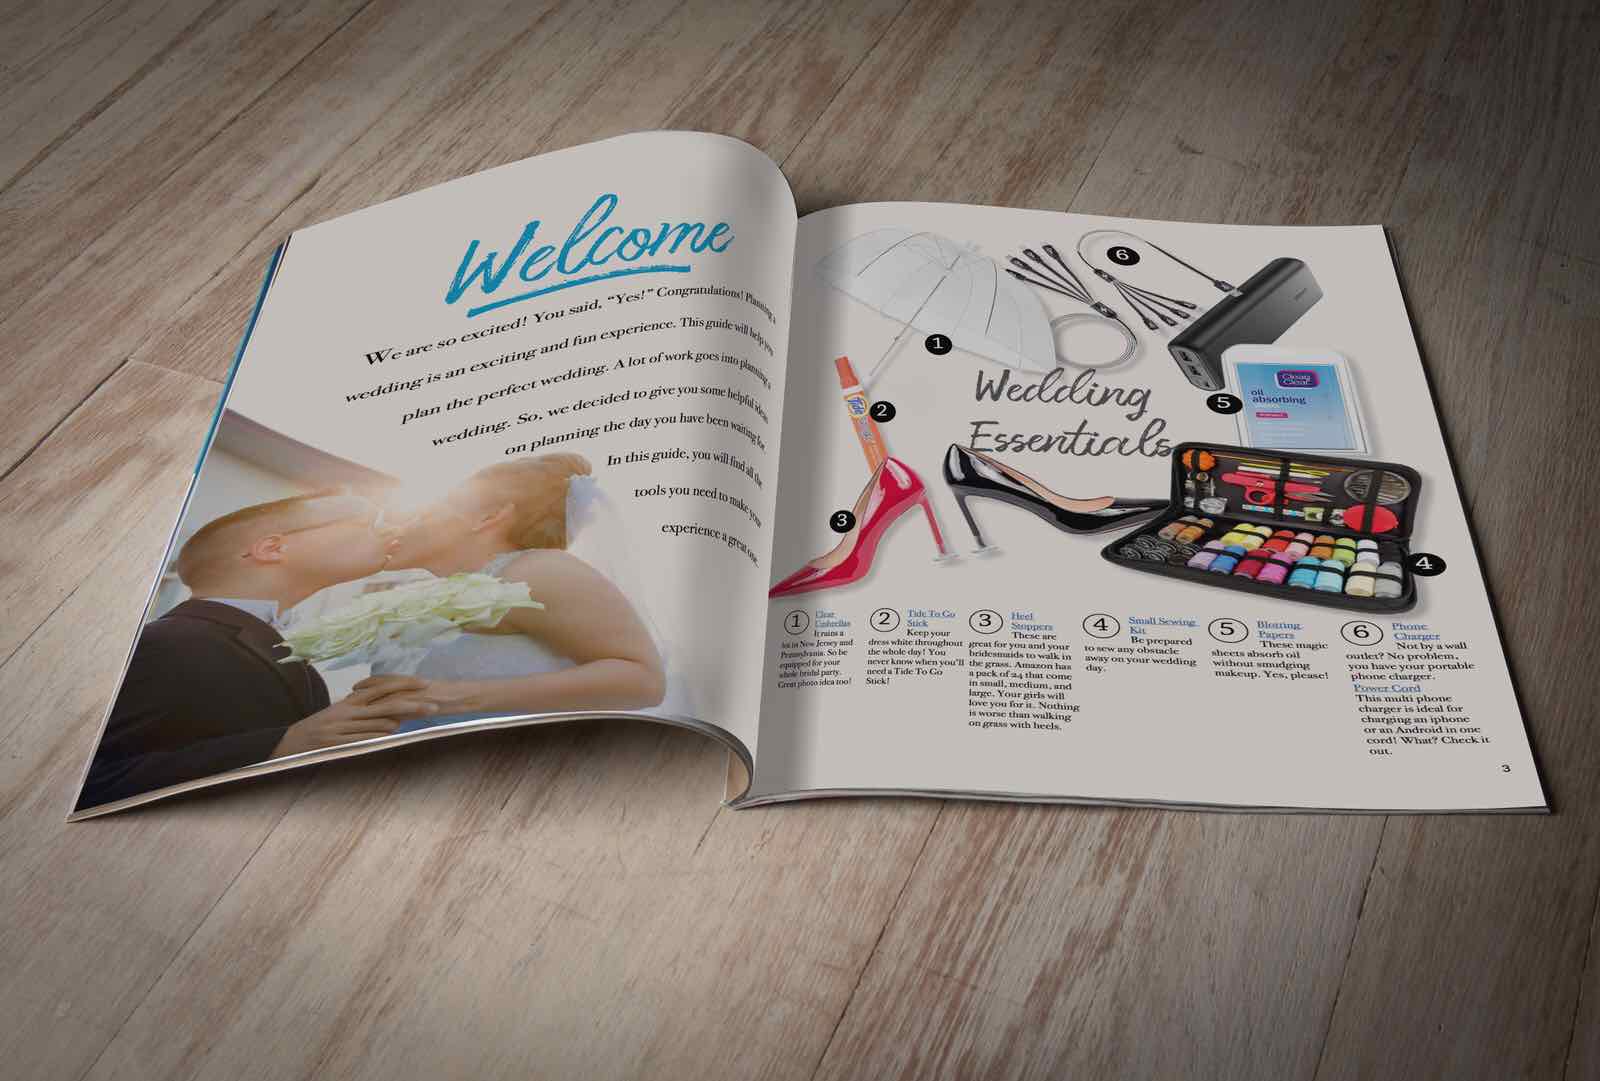 Free Wedding Planning Guide. Dont forget something at your wedding. Download it for free today!